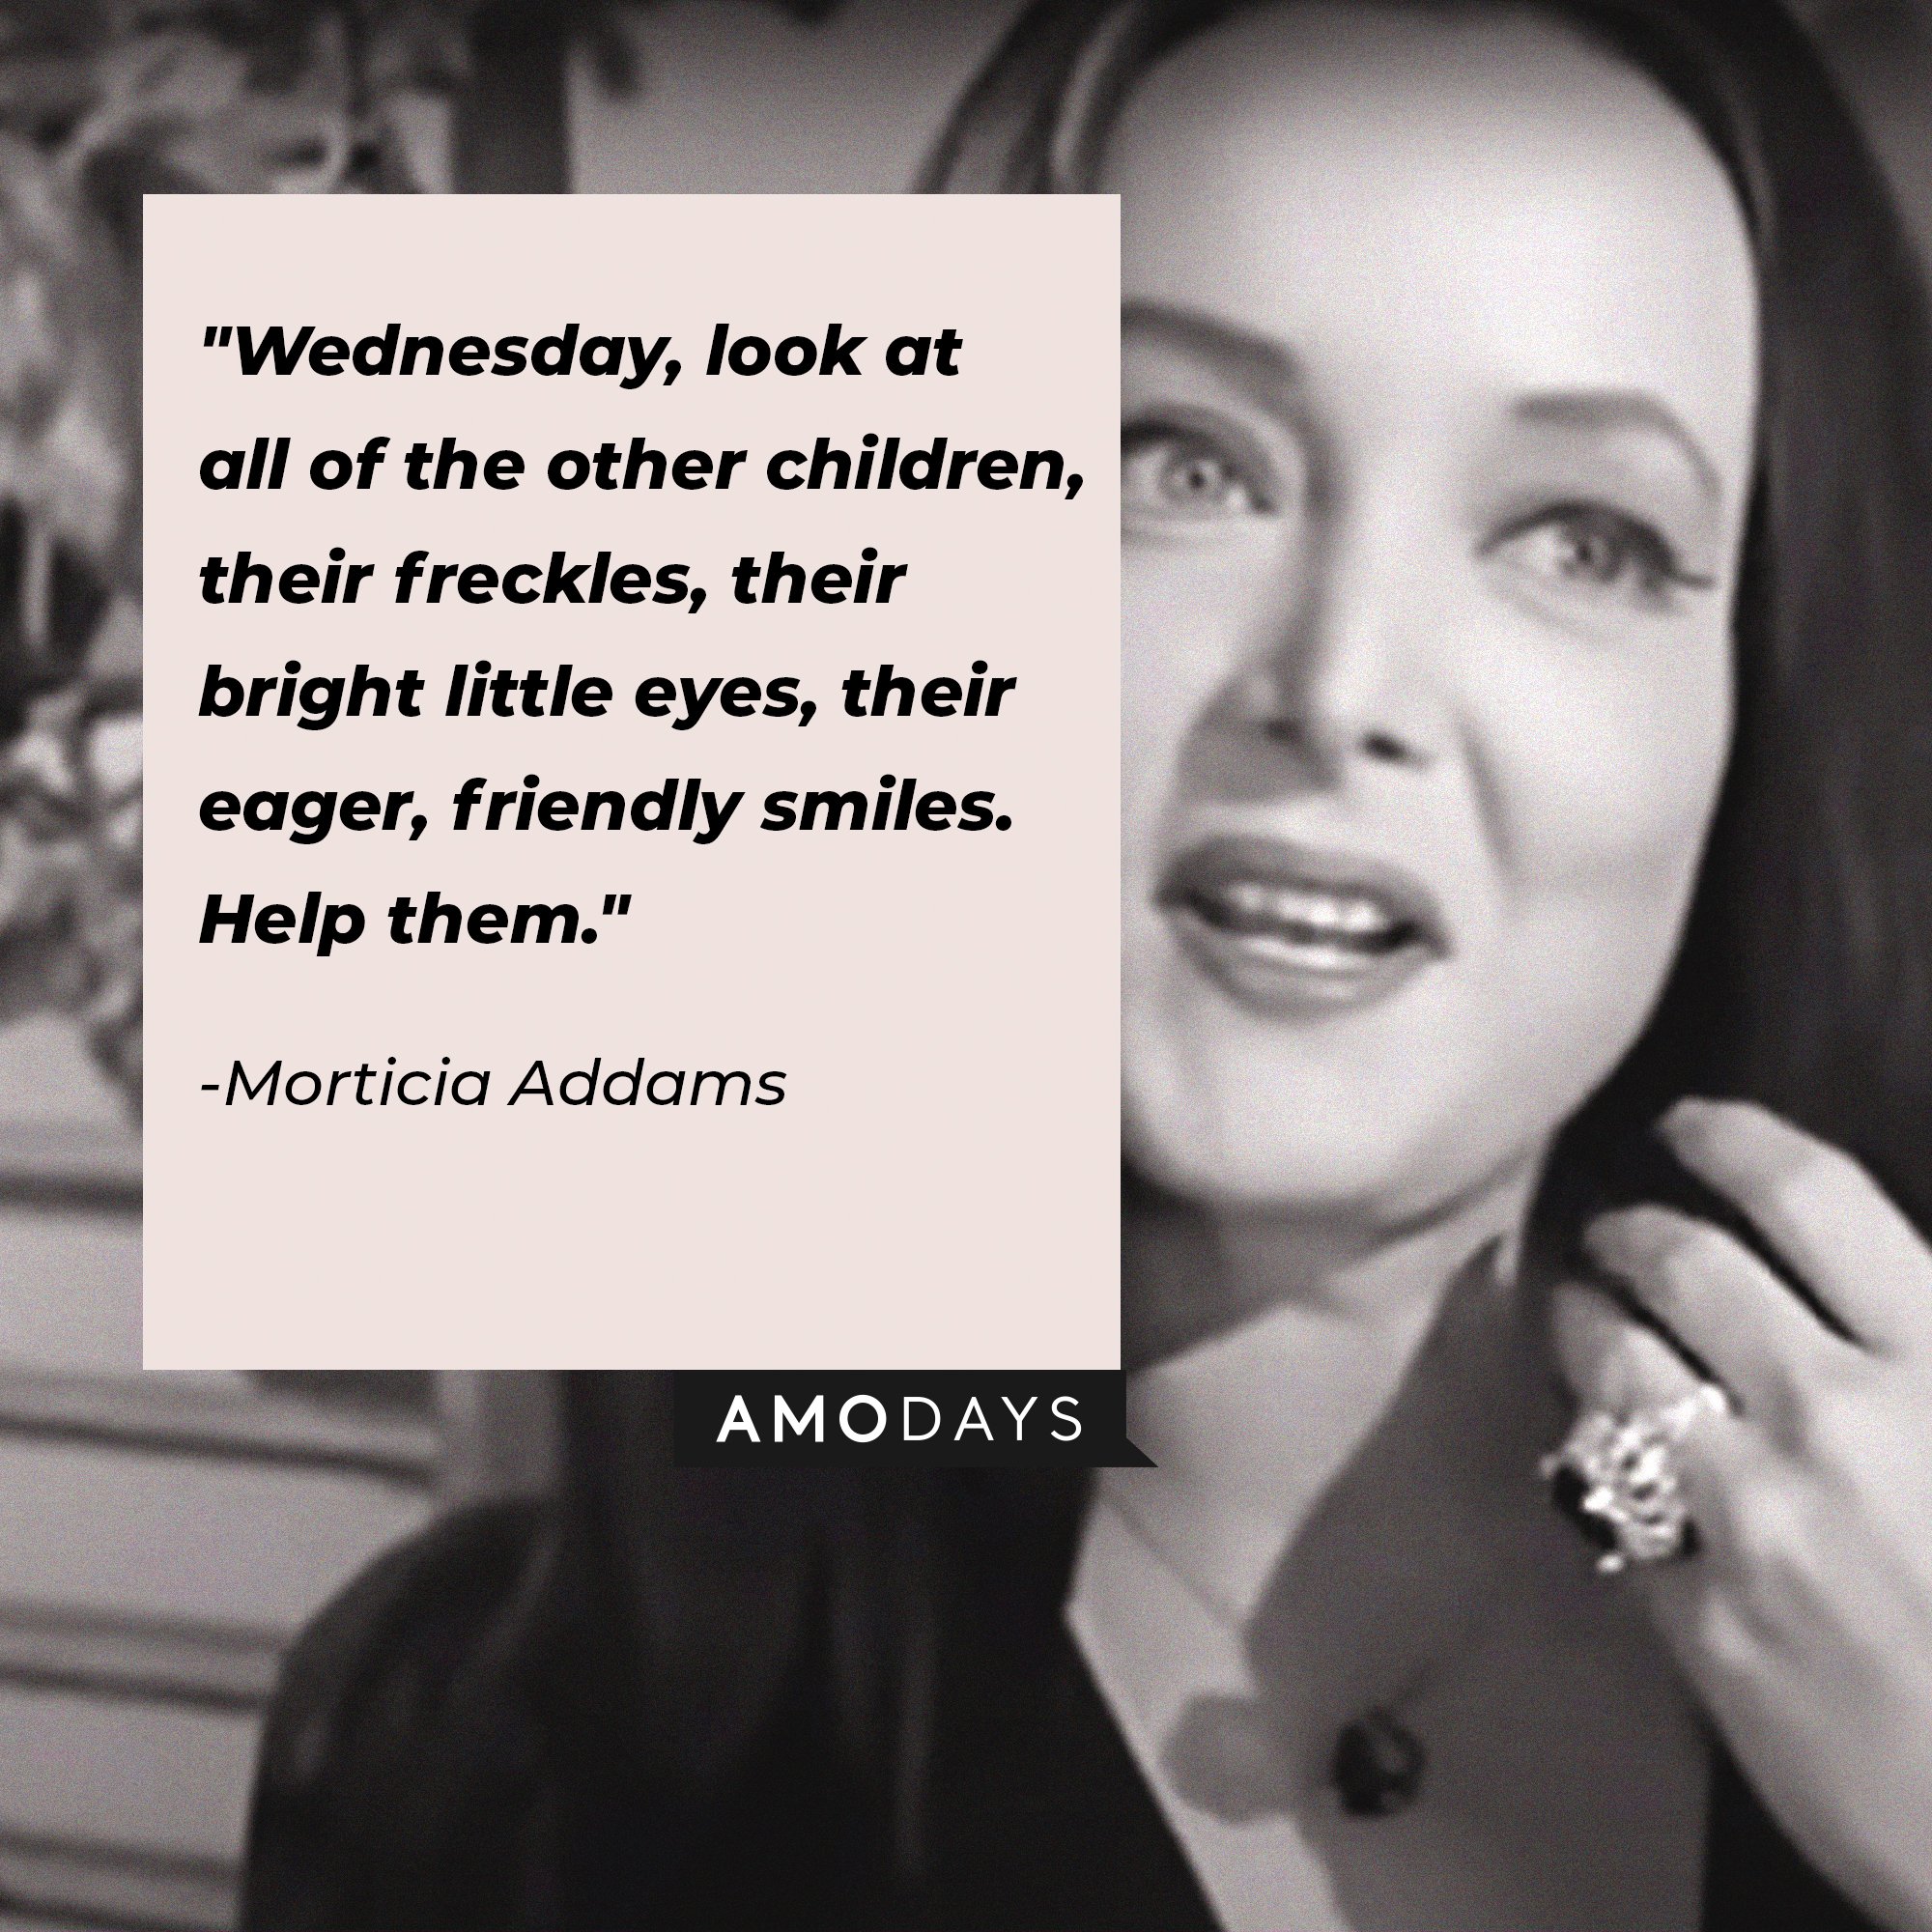 Morticia Addams’ quote: "Wednesday, look at all of the other children, their freckles, their bright little eyes, their eager, friendly smiles. Help them." | Image: AmoDays